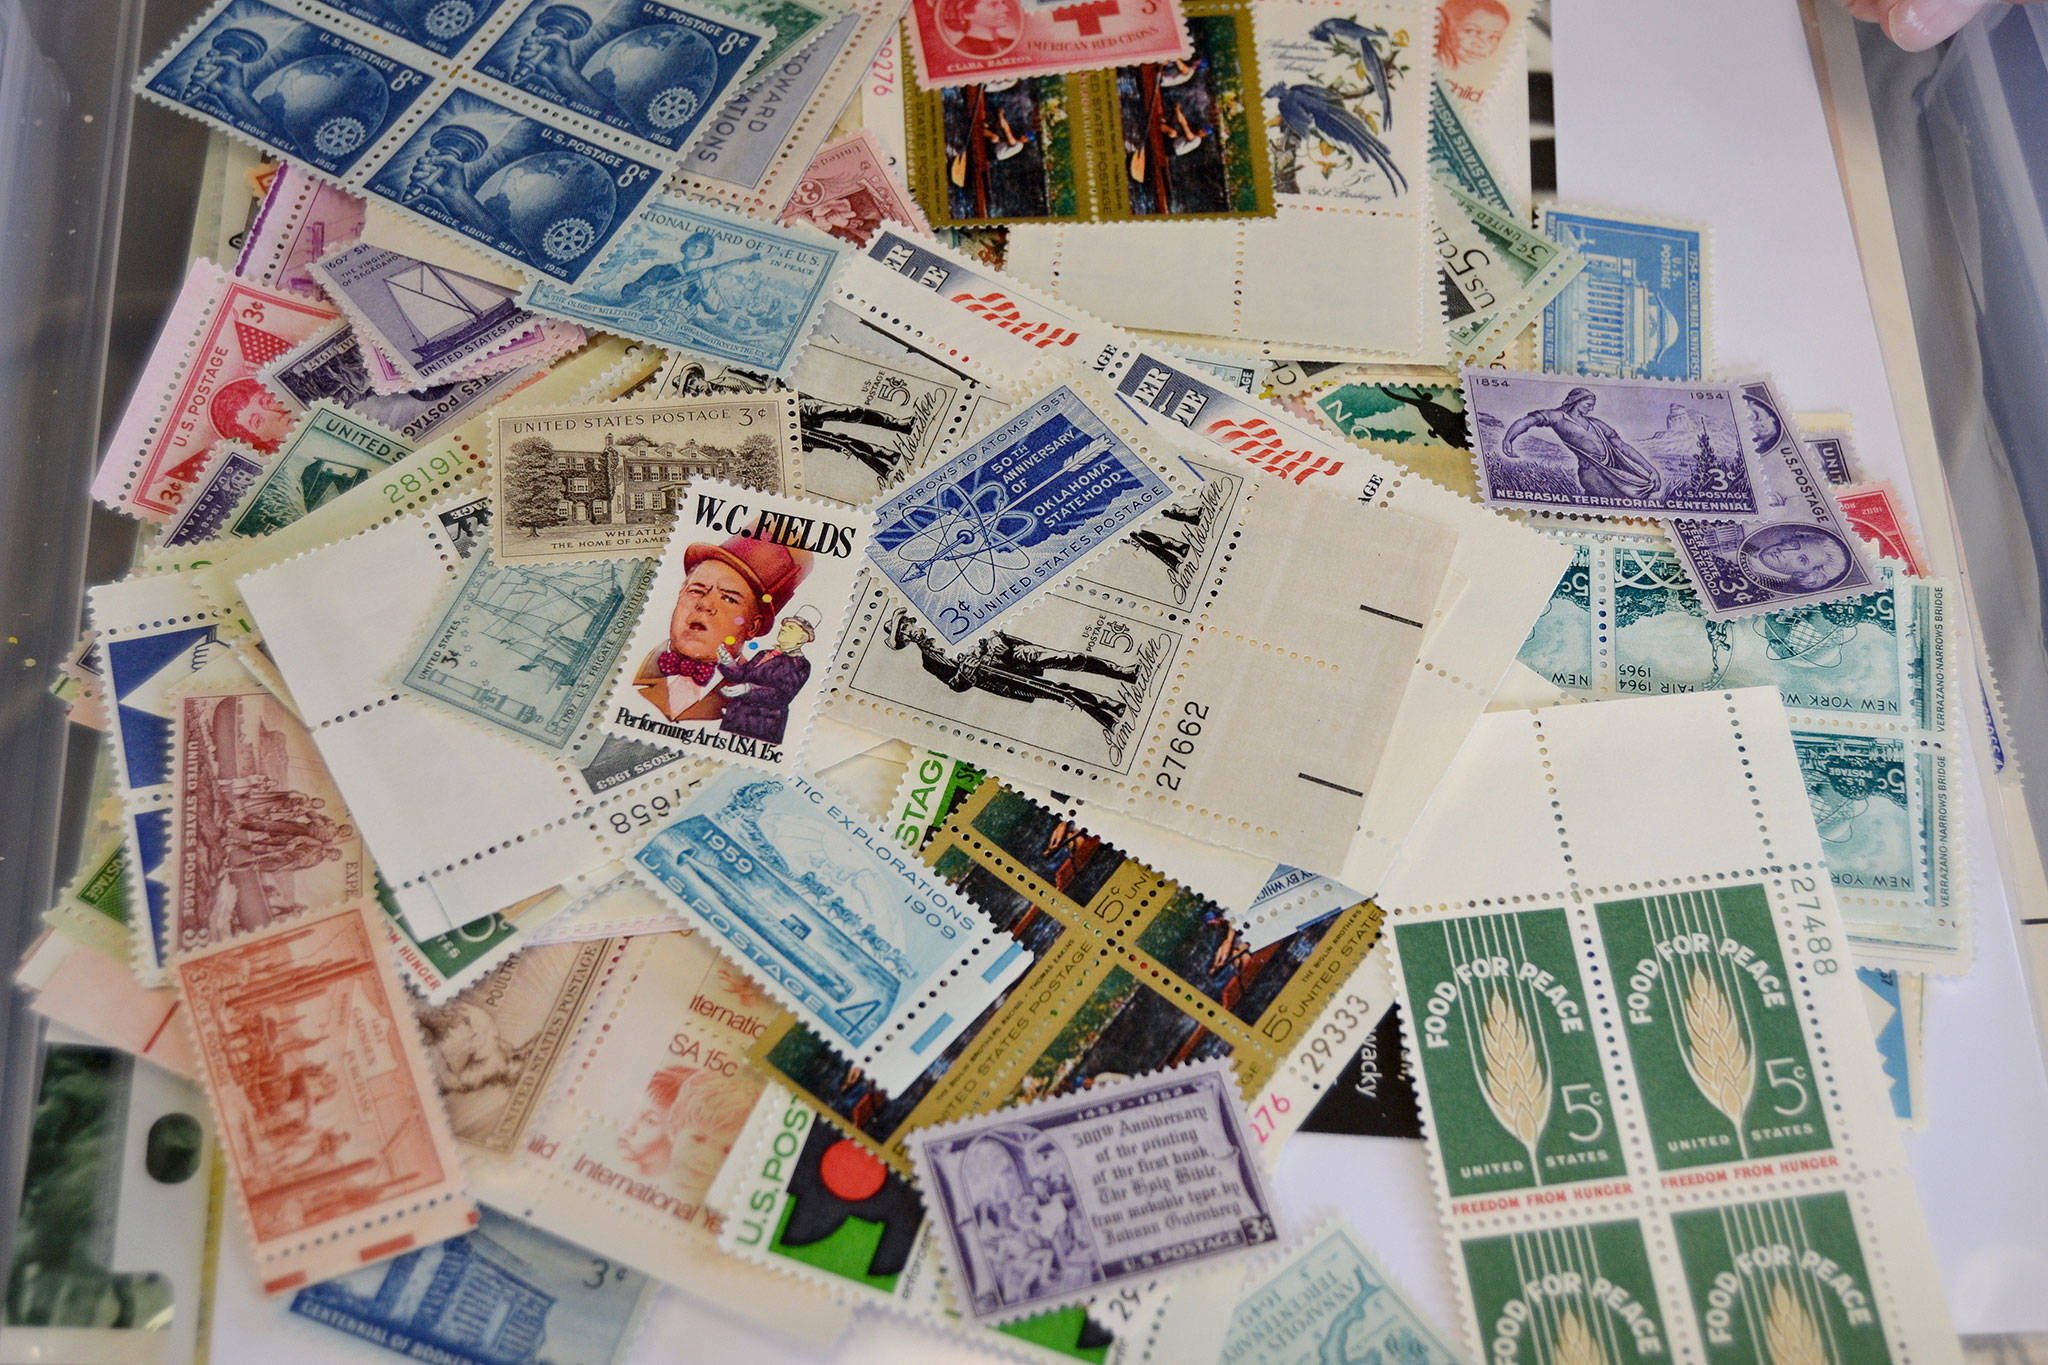 Henry Jones creates a “My Post Office” assortment of collector’s stamps totaling about $50 in mailable stamps. He plans to auction off the collections at the Rotary Club of Sequim’s Salmon Bake on Aug. 12 at the Sequim Boys & Girls Club. Sequim Gazette photo by Matthew Nash